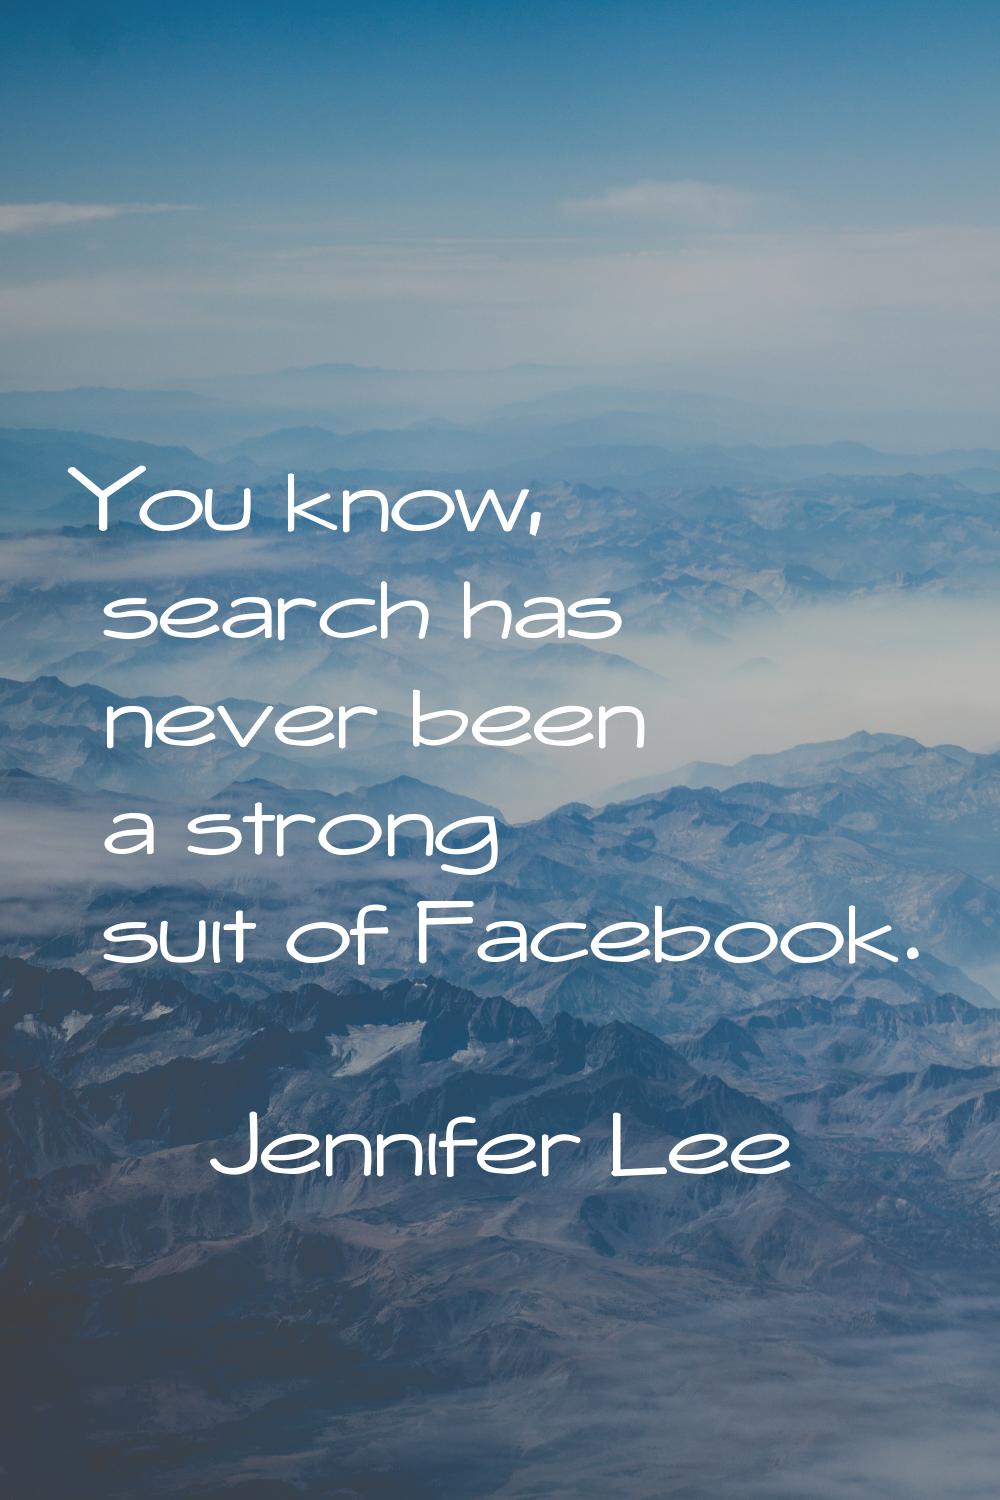 You know, search has never been a strong suit of Facebook.